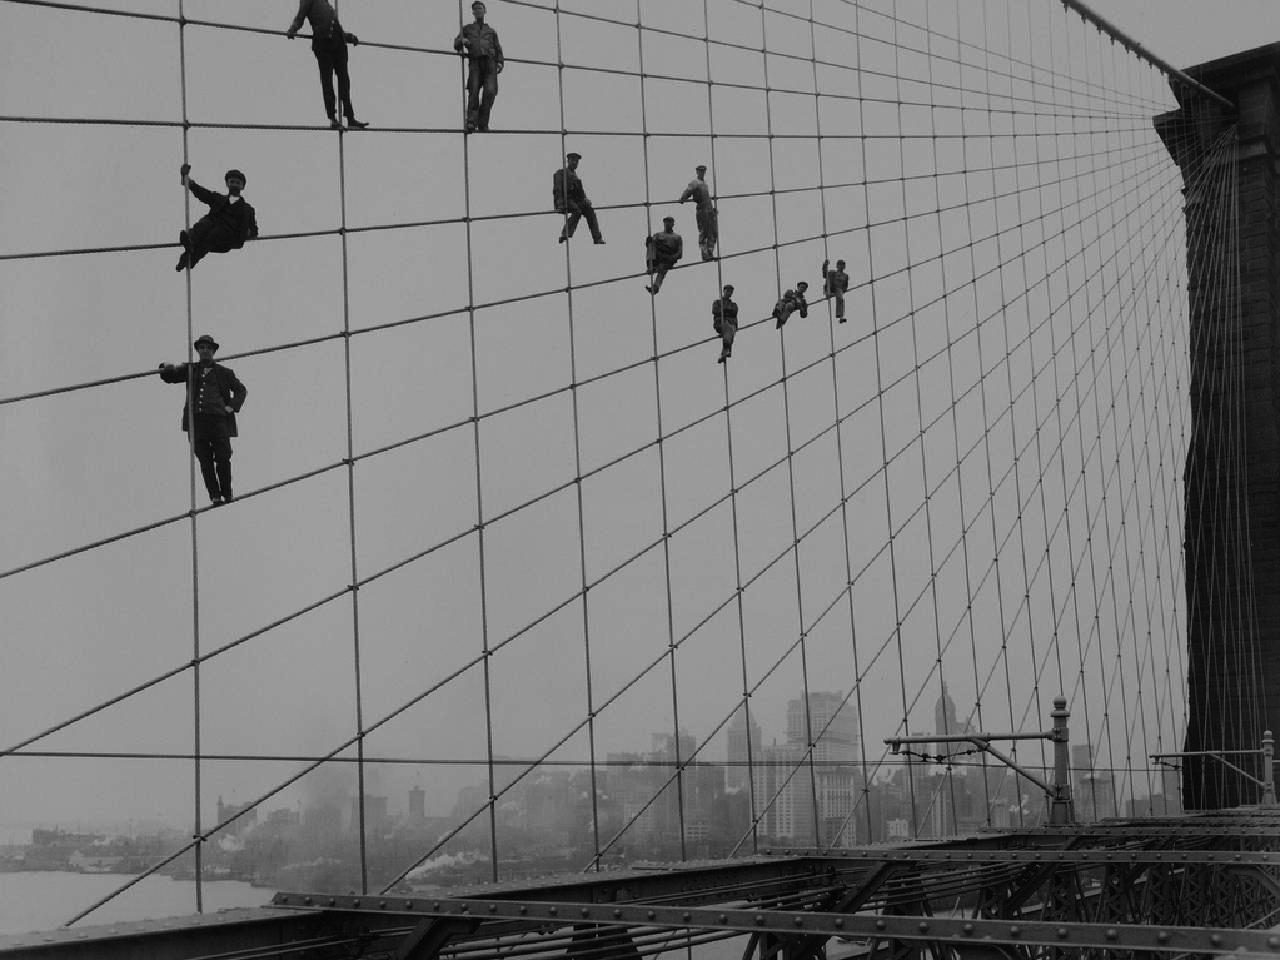 Early photograph of eight men perched on supporting cables on the Brooklyn Bridge during its construction.